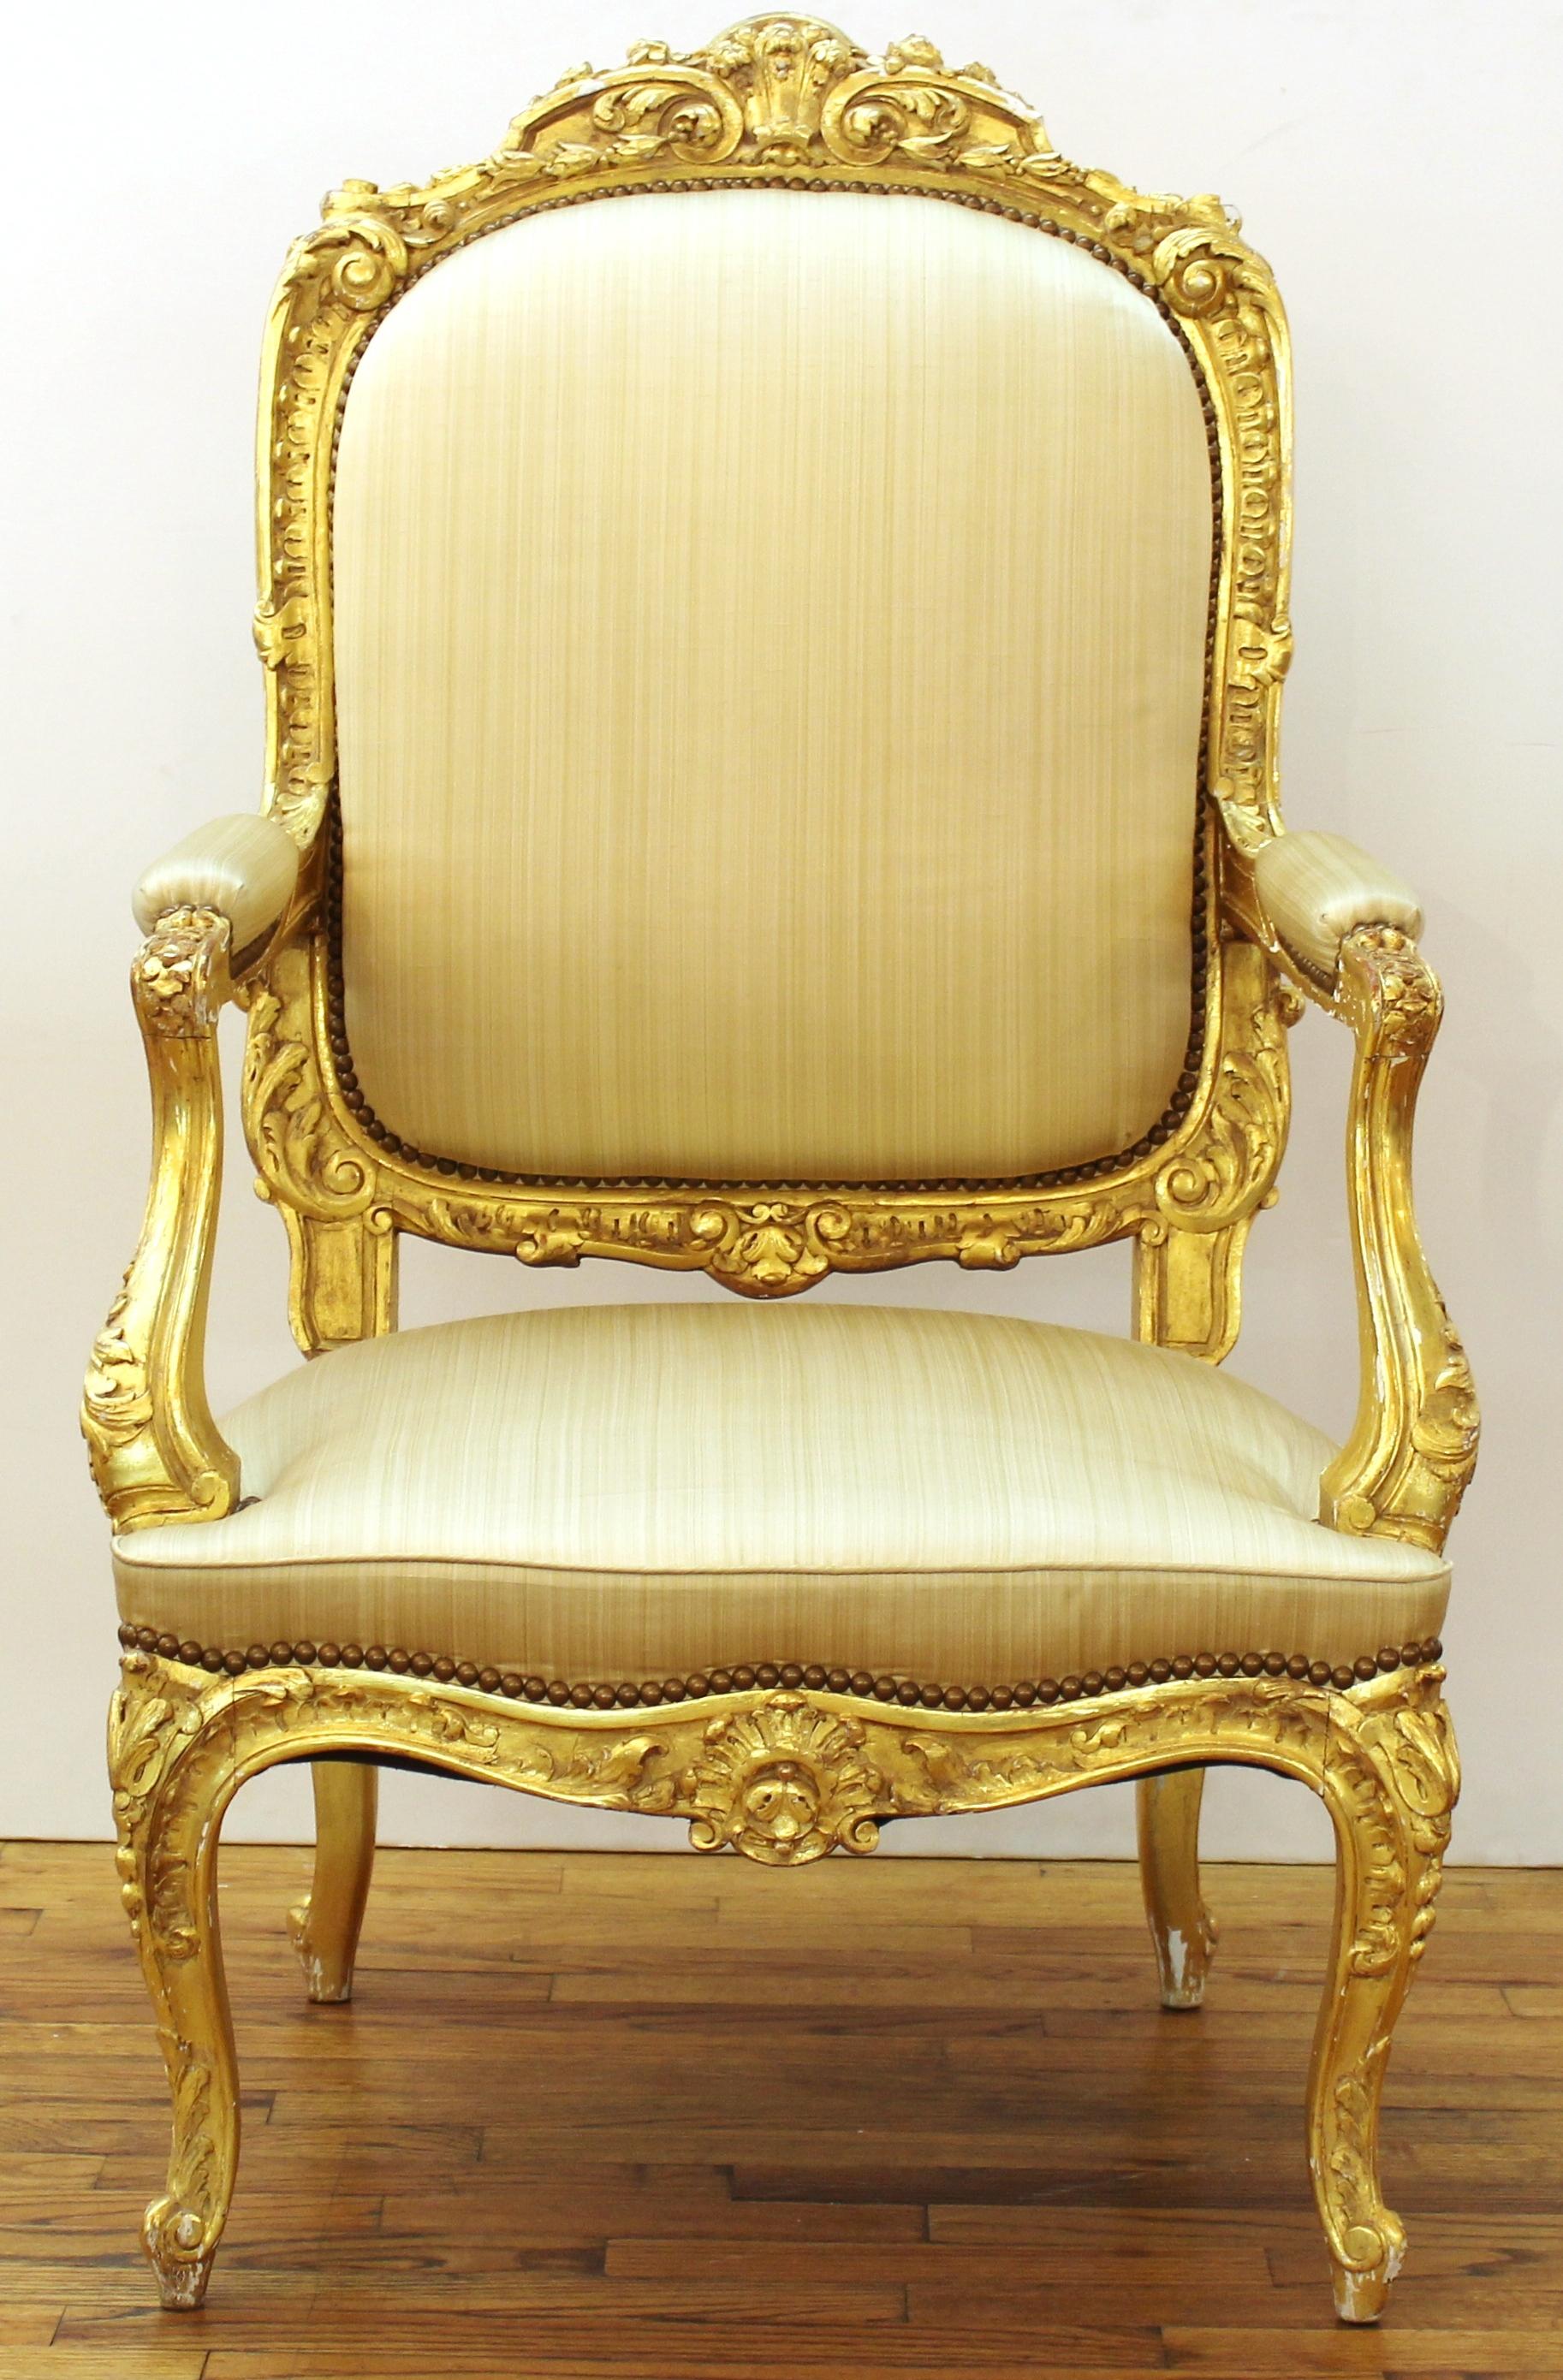 North Italian Baroque set of two giltwood fauteuils a la reine, mid-18th century. Minor chips to giltwood. Some age-related staining and tears to the fabric.